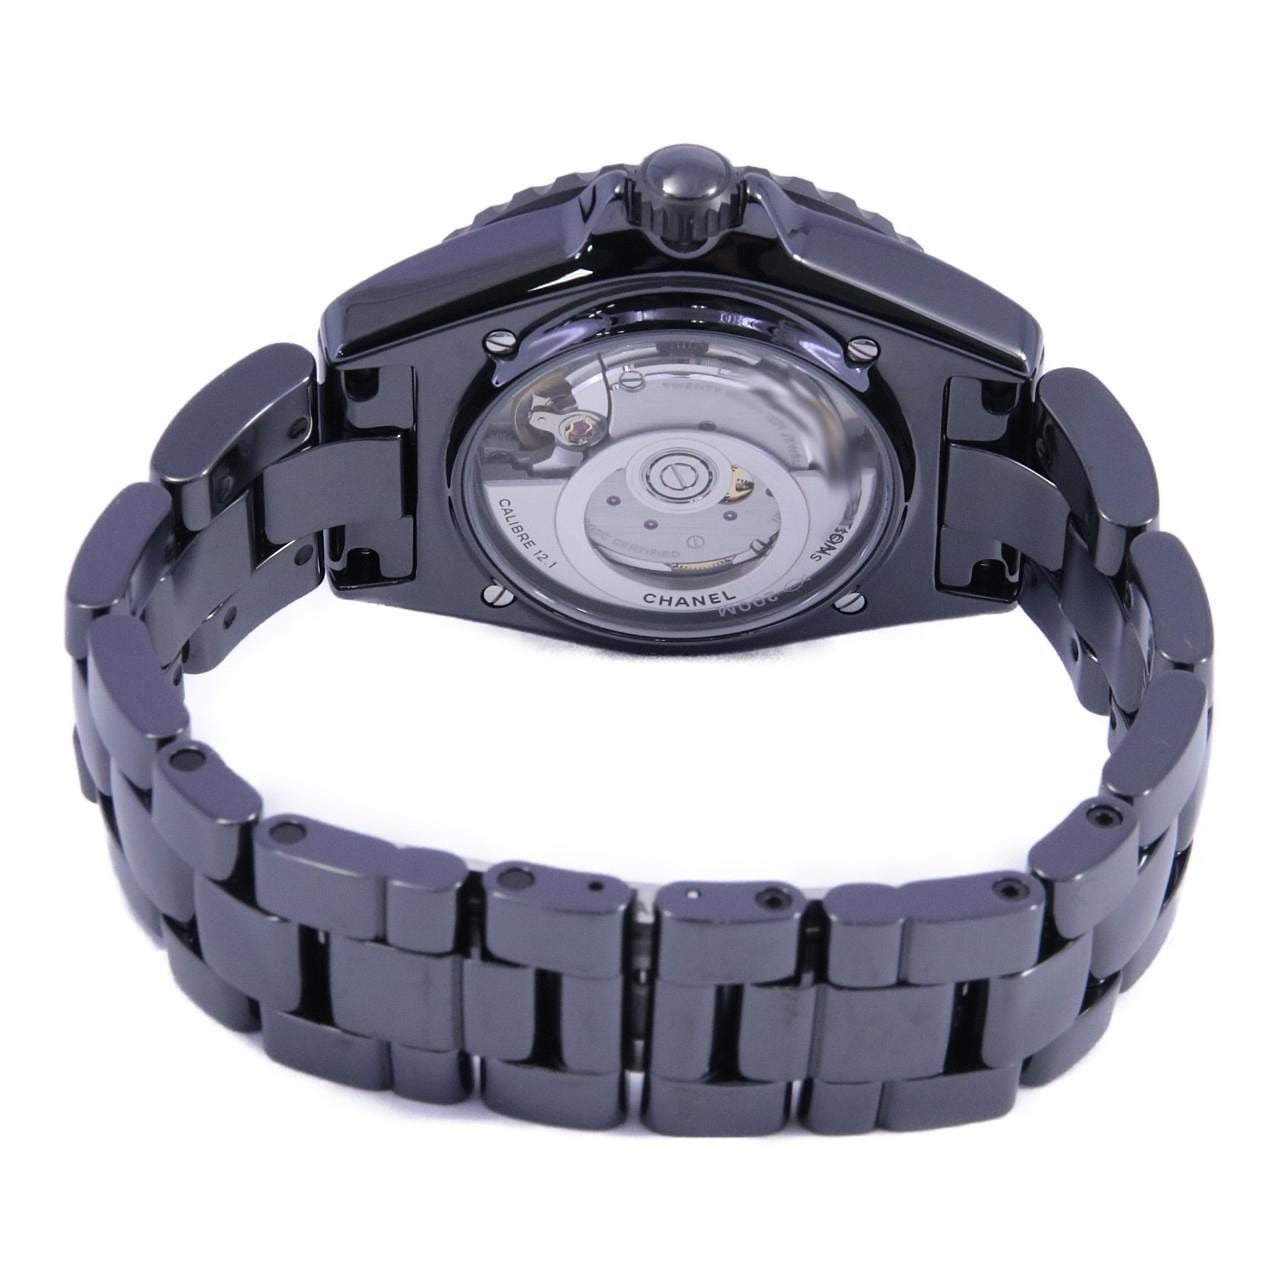 [BRAND NEW] CHANEL J12 Wanted Du CHANEL 38mm Ceramic LIMITED H7418 Ceramic Automatic